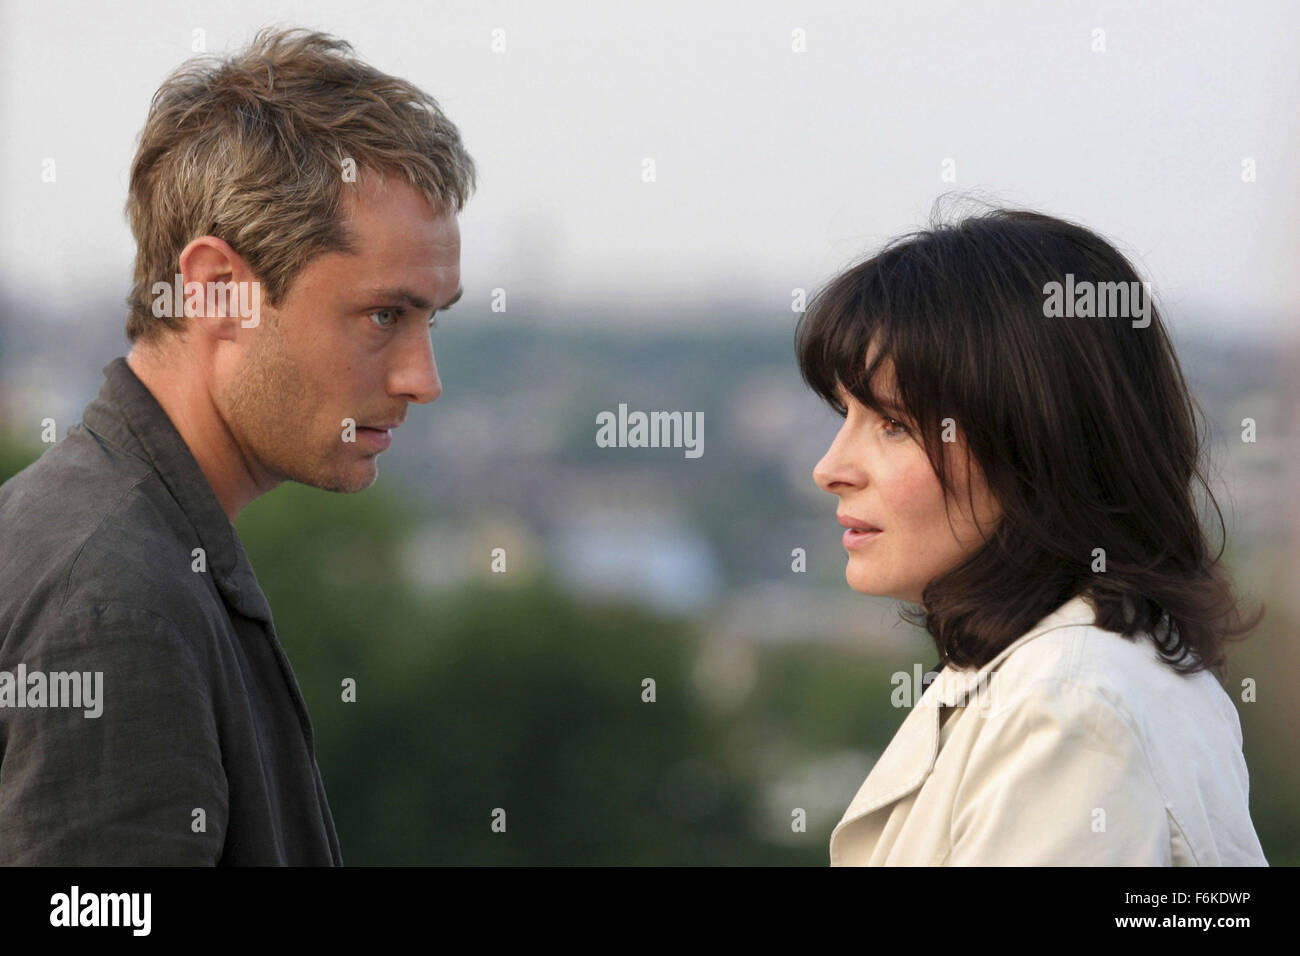 Oct 16, 2006; Los Angeles, CA, USA; RELEASE DATE: January, 2007. STUDIO: Miramax Films. PLOT: A Landscape Architect's dealings with a young thief cause him to re-evaluate his life. PICTURED: JUDE LAW as Will and JULIETTE BINOCHE as Amira. Mandatory Credit: Photo by Laurie Sparham/The Weinstein Company. ( Stock Photo